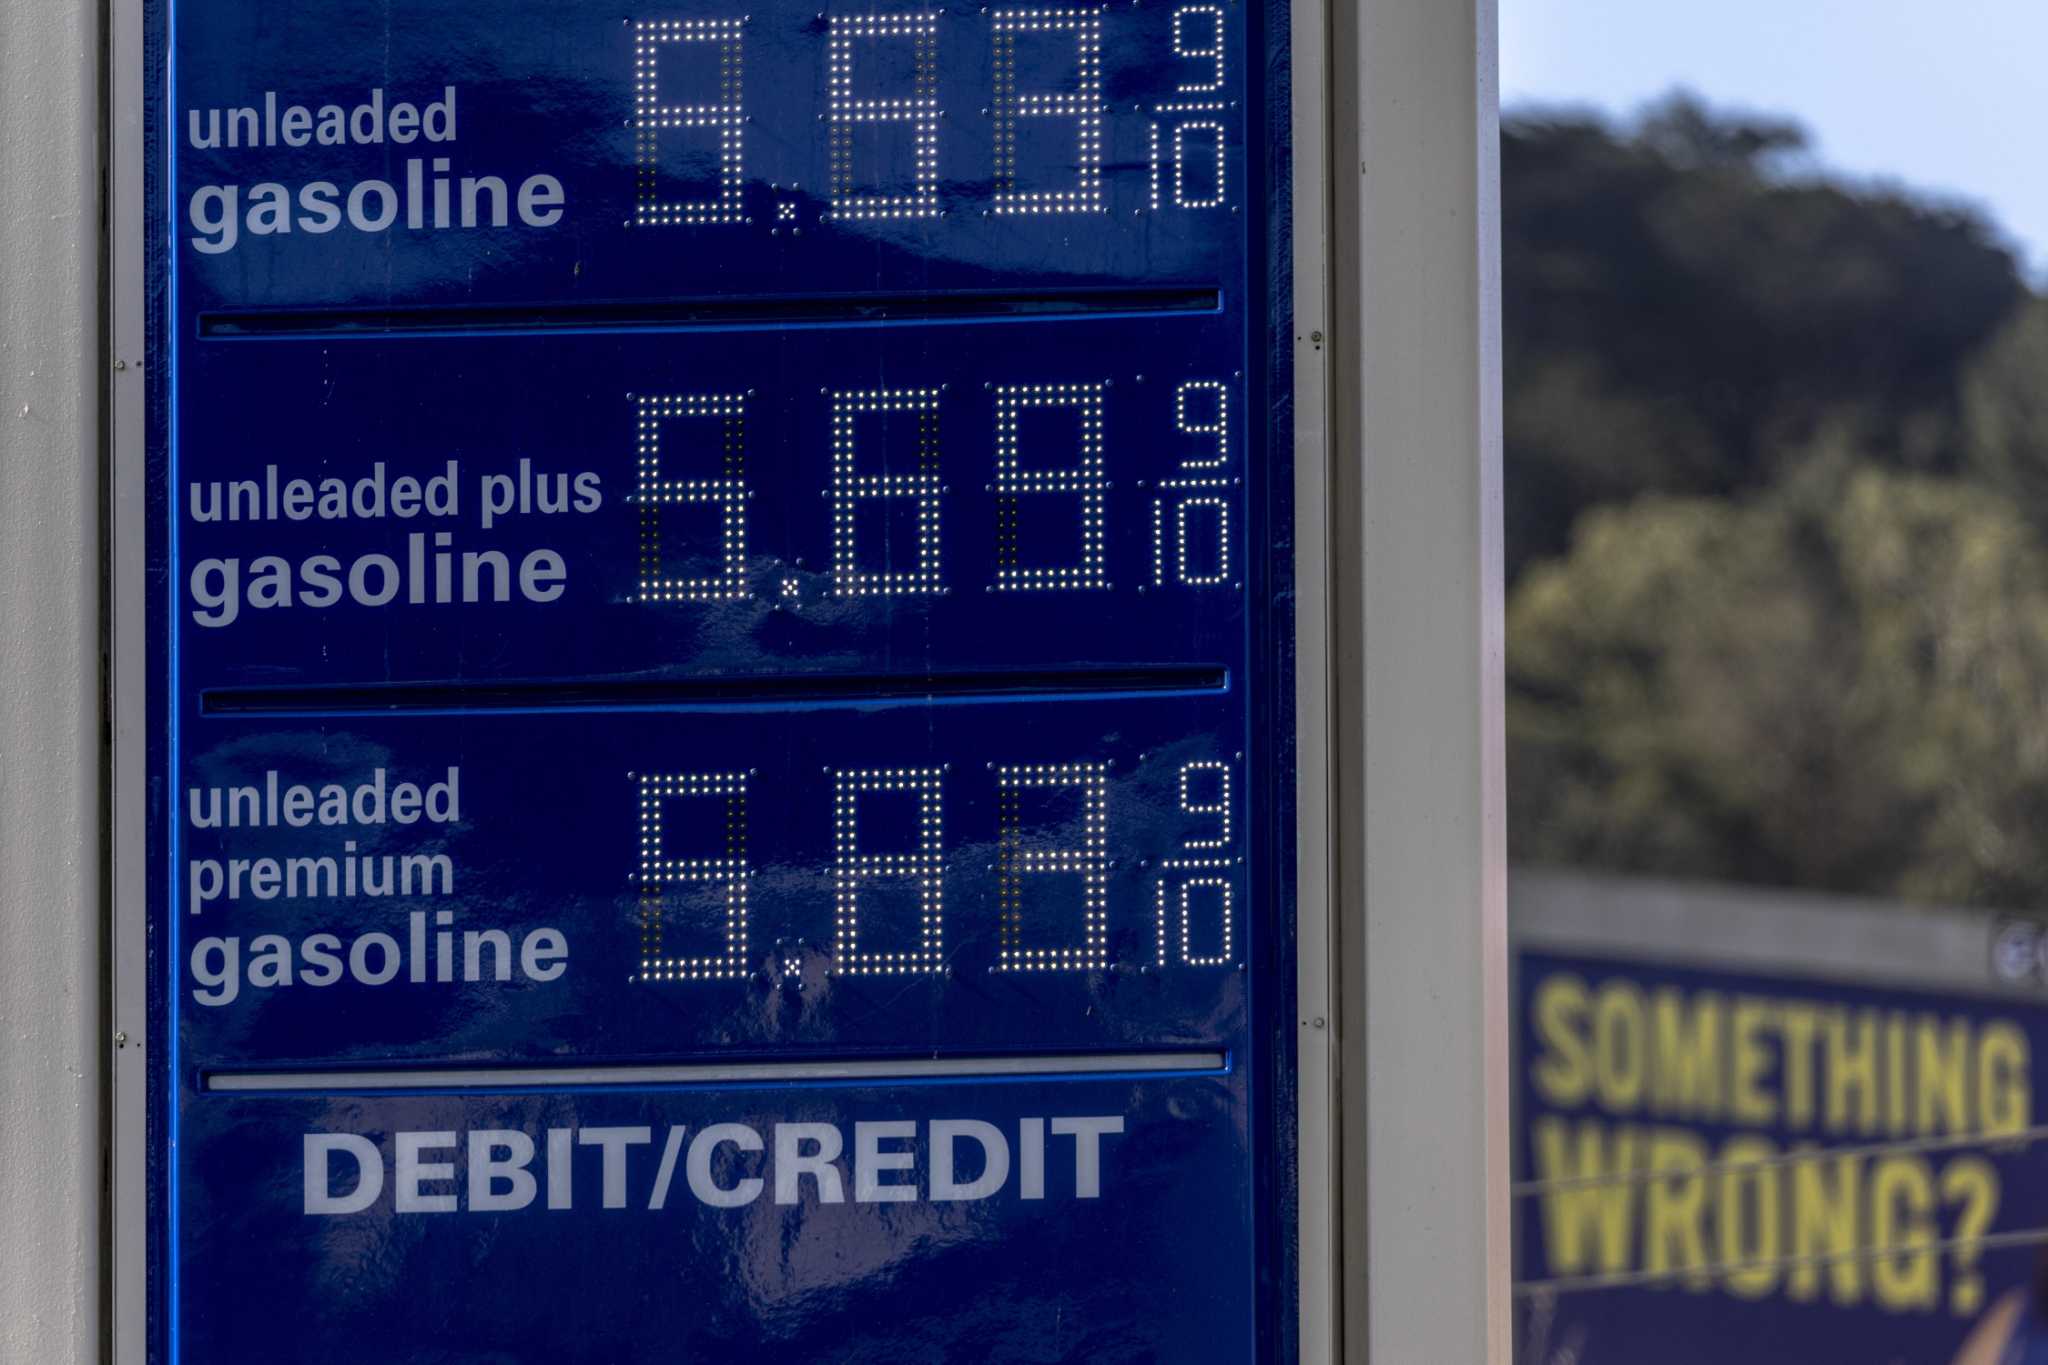 california-bay-area-gas-prices-drop-here-s-how-low-they-could-get